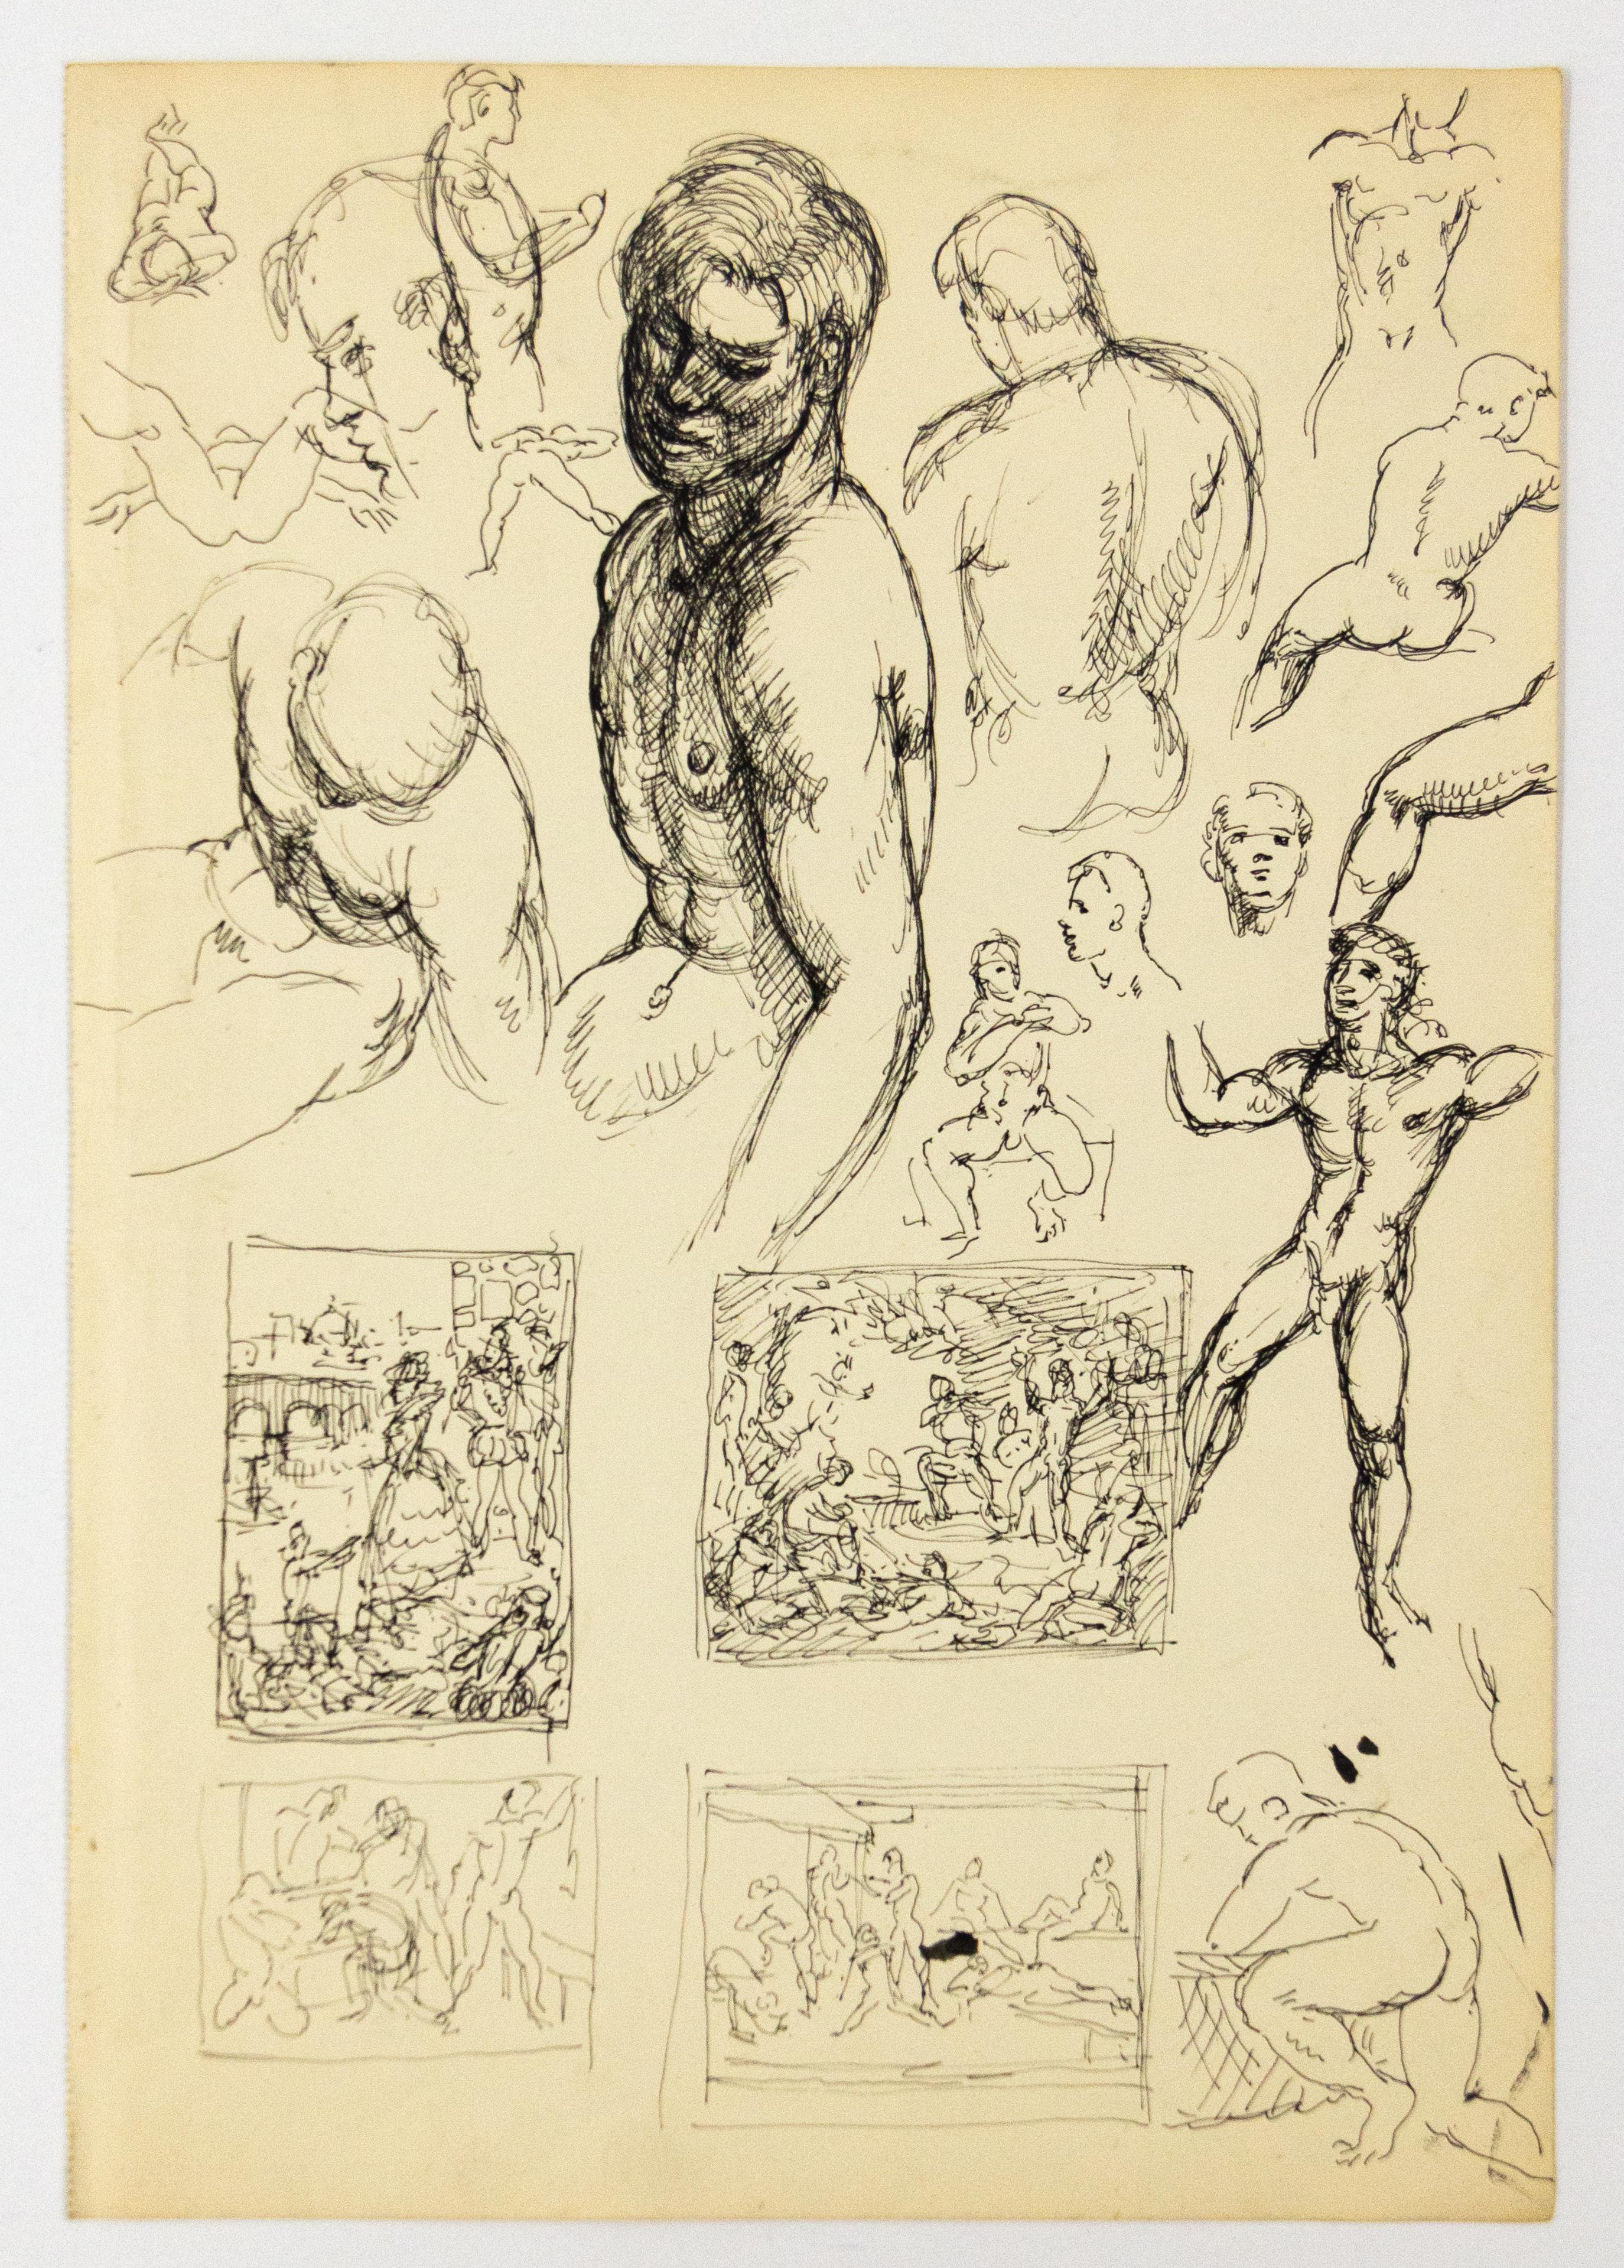 Many Figure Studies and Studies for Compositions with Groups - Art by John S. Barrington